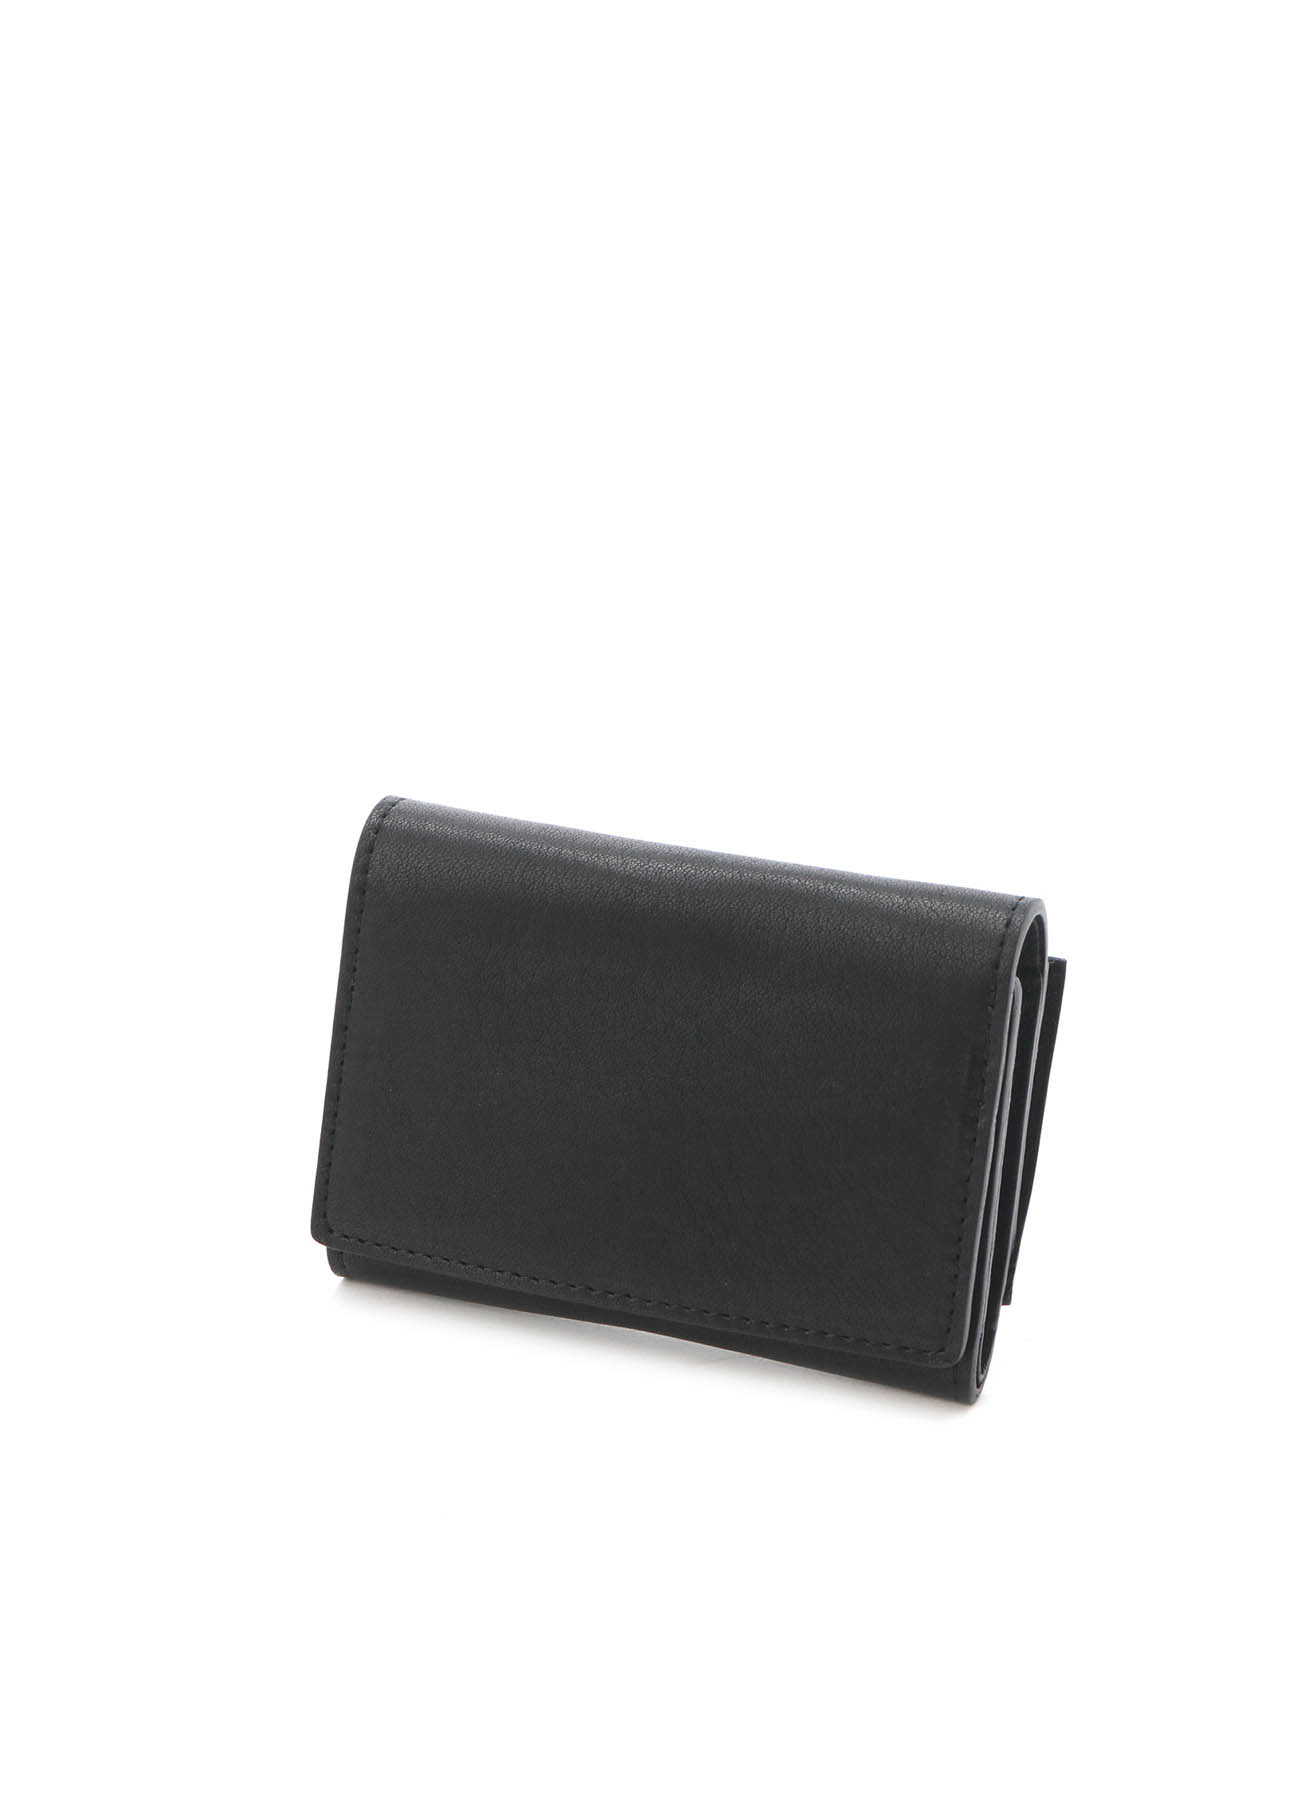 SMOOTH LEATHER THREE FOLD WALLET